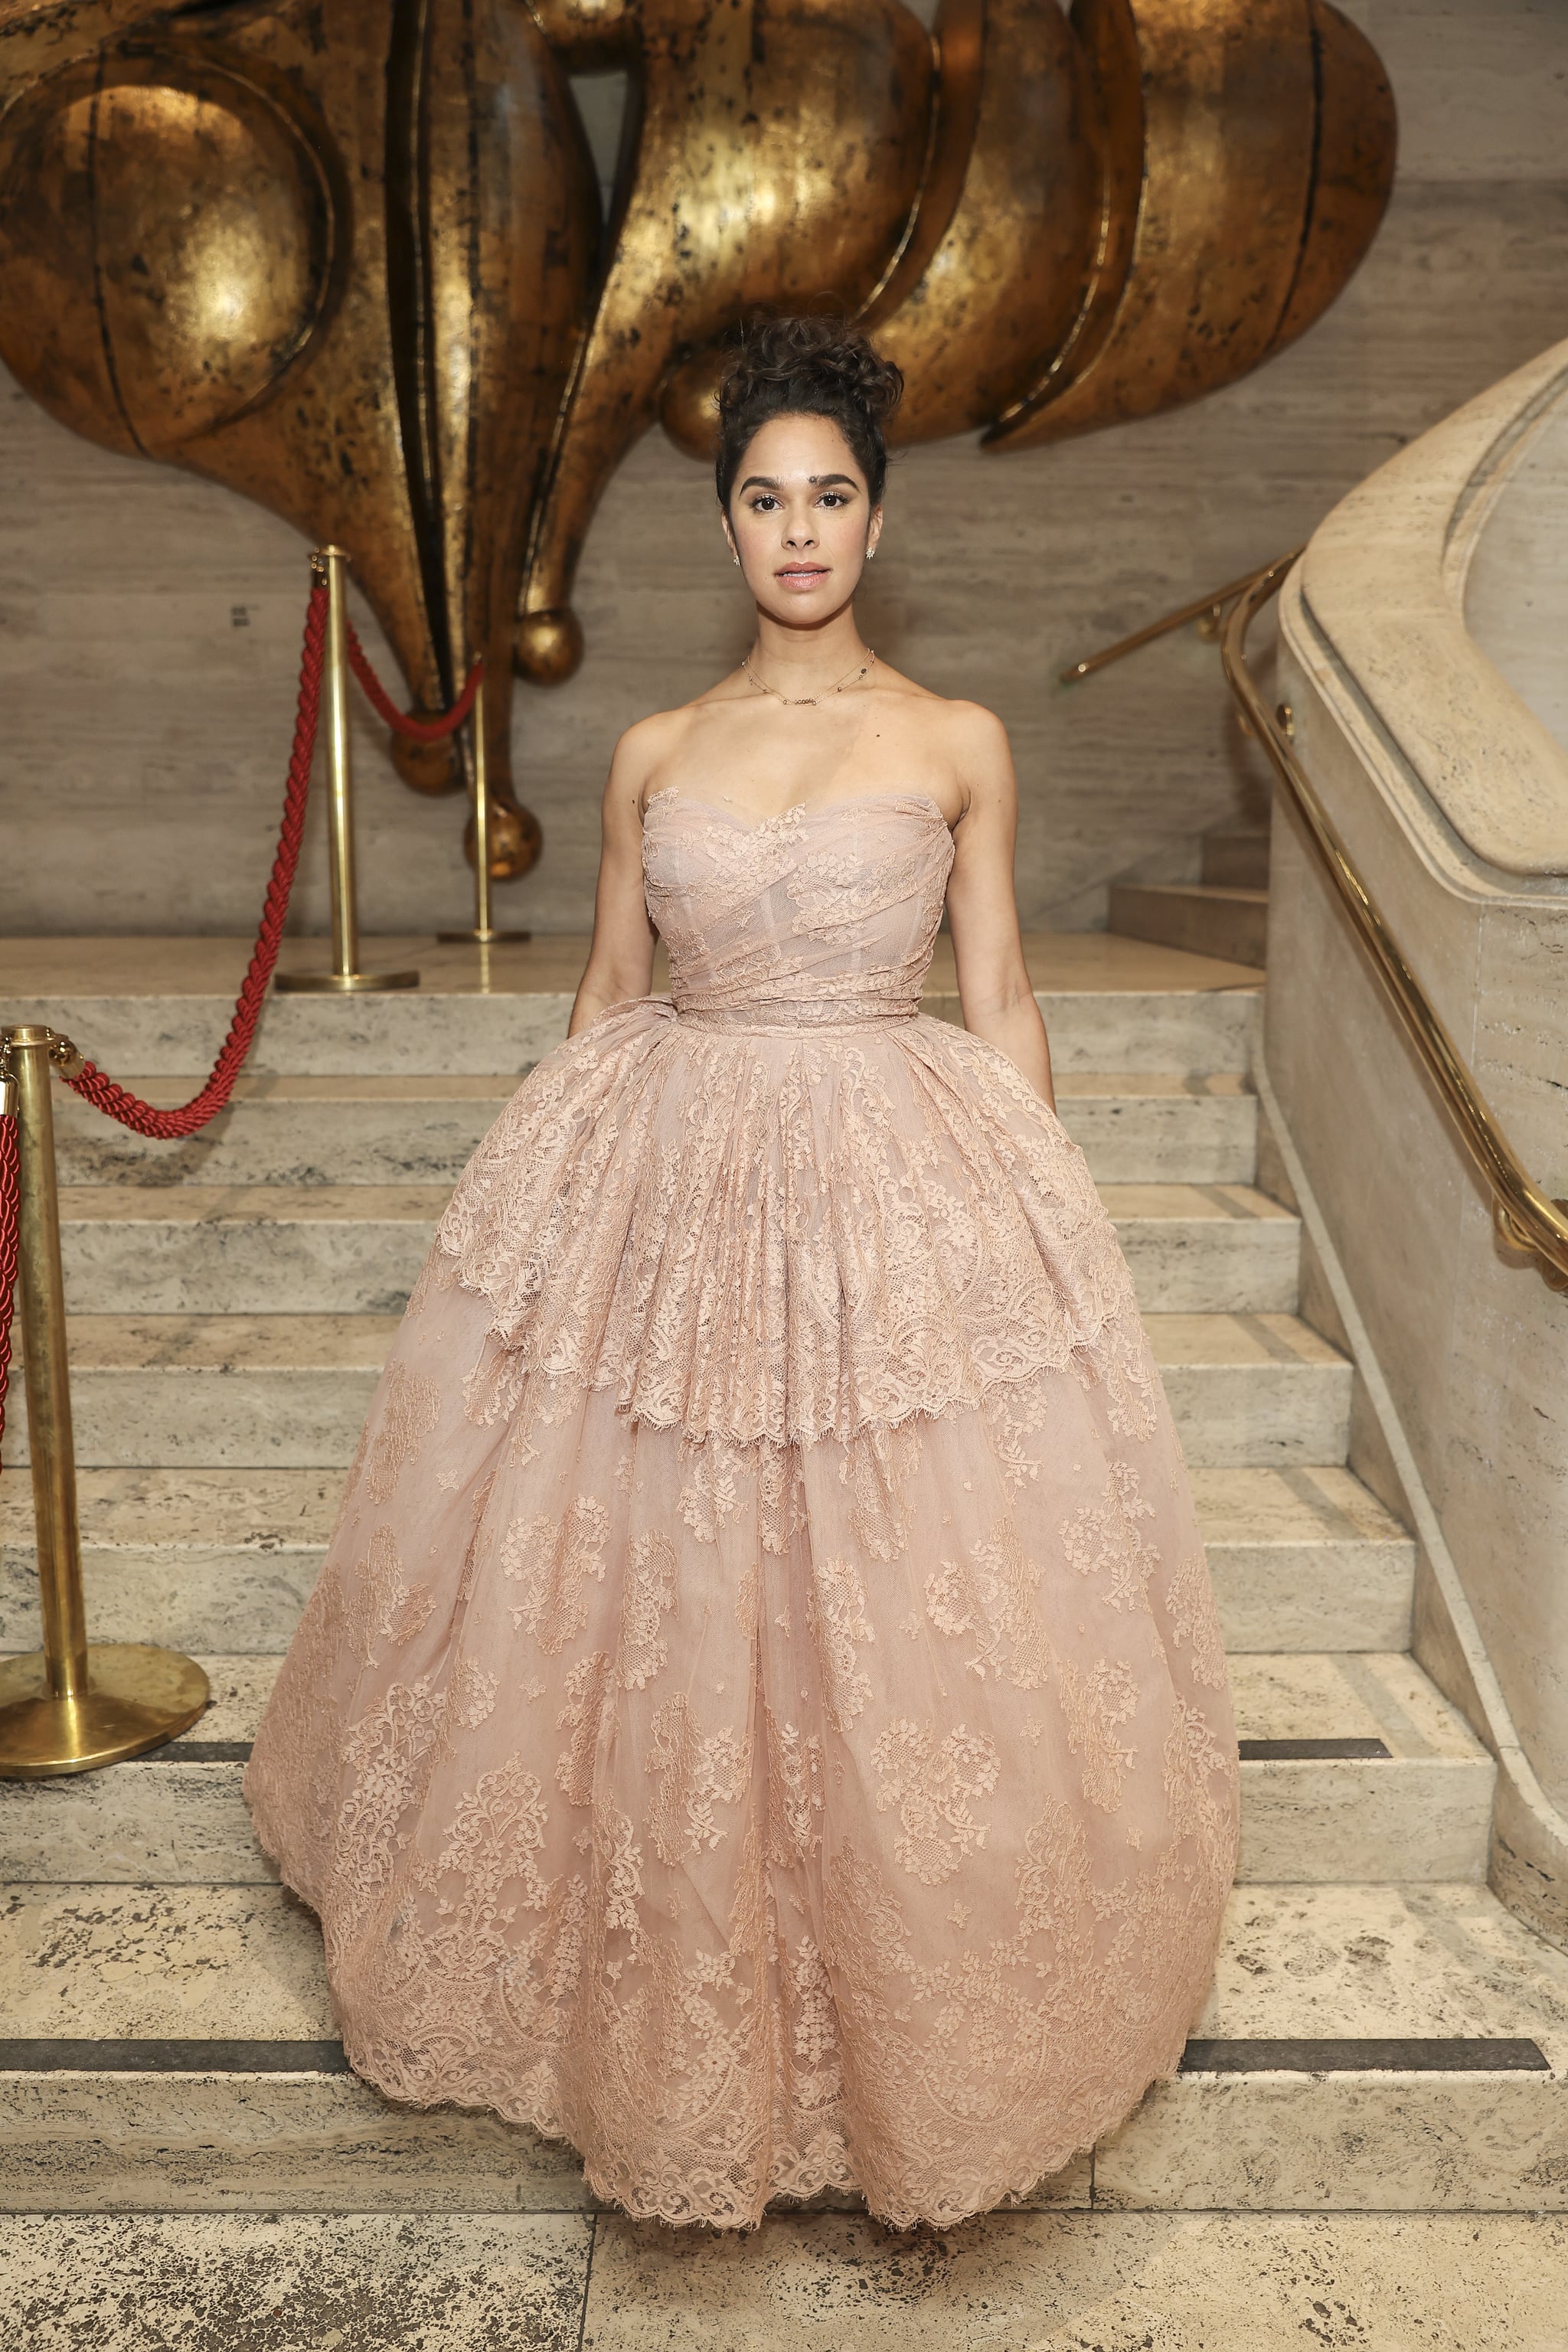 NEW YORK, NEW YORK - OCTOBER 27:  Misty Copeland attends the American Ballet Theatre Fall Gala at The David Koch Theatre at Lincoln Centre on October 27, 2022 in New York City. (Photo by Dimitrios Kambouris/Getty Images for American Ballet Theatre)